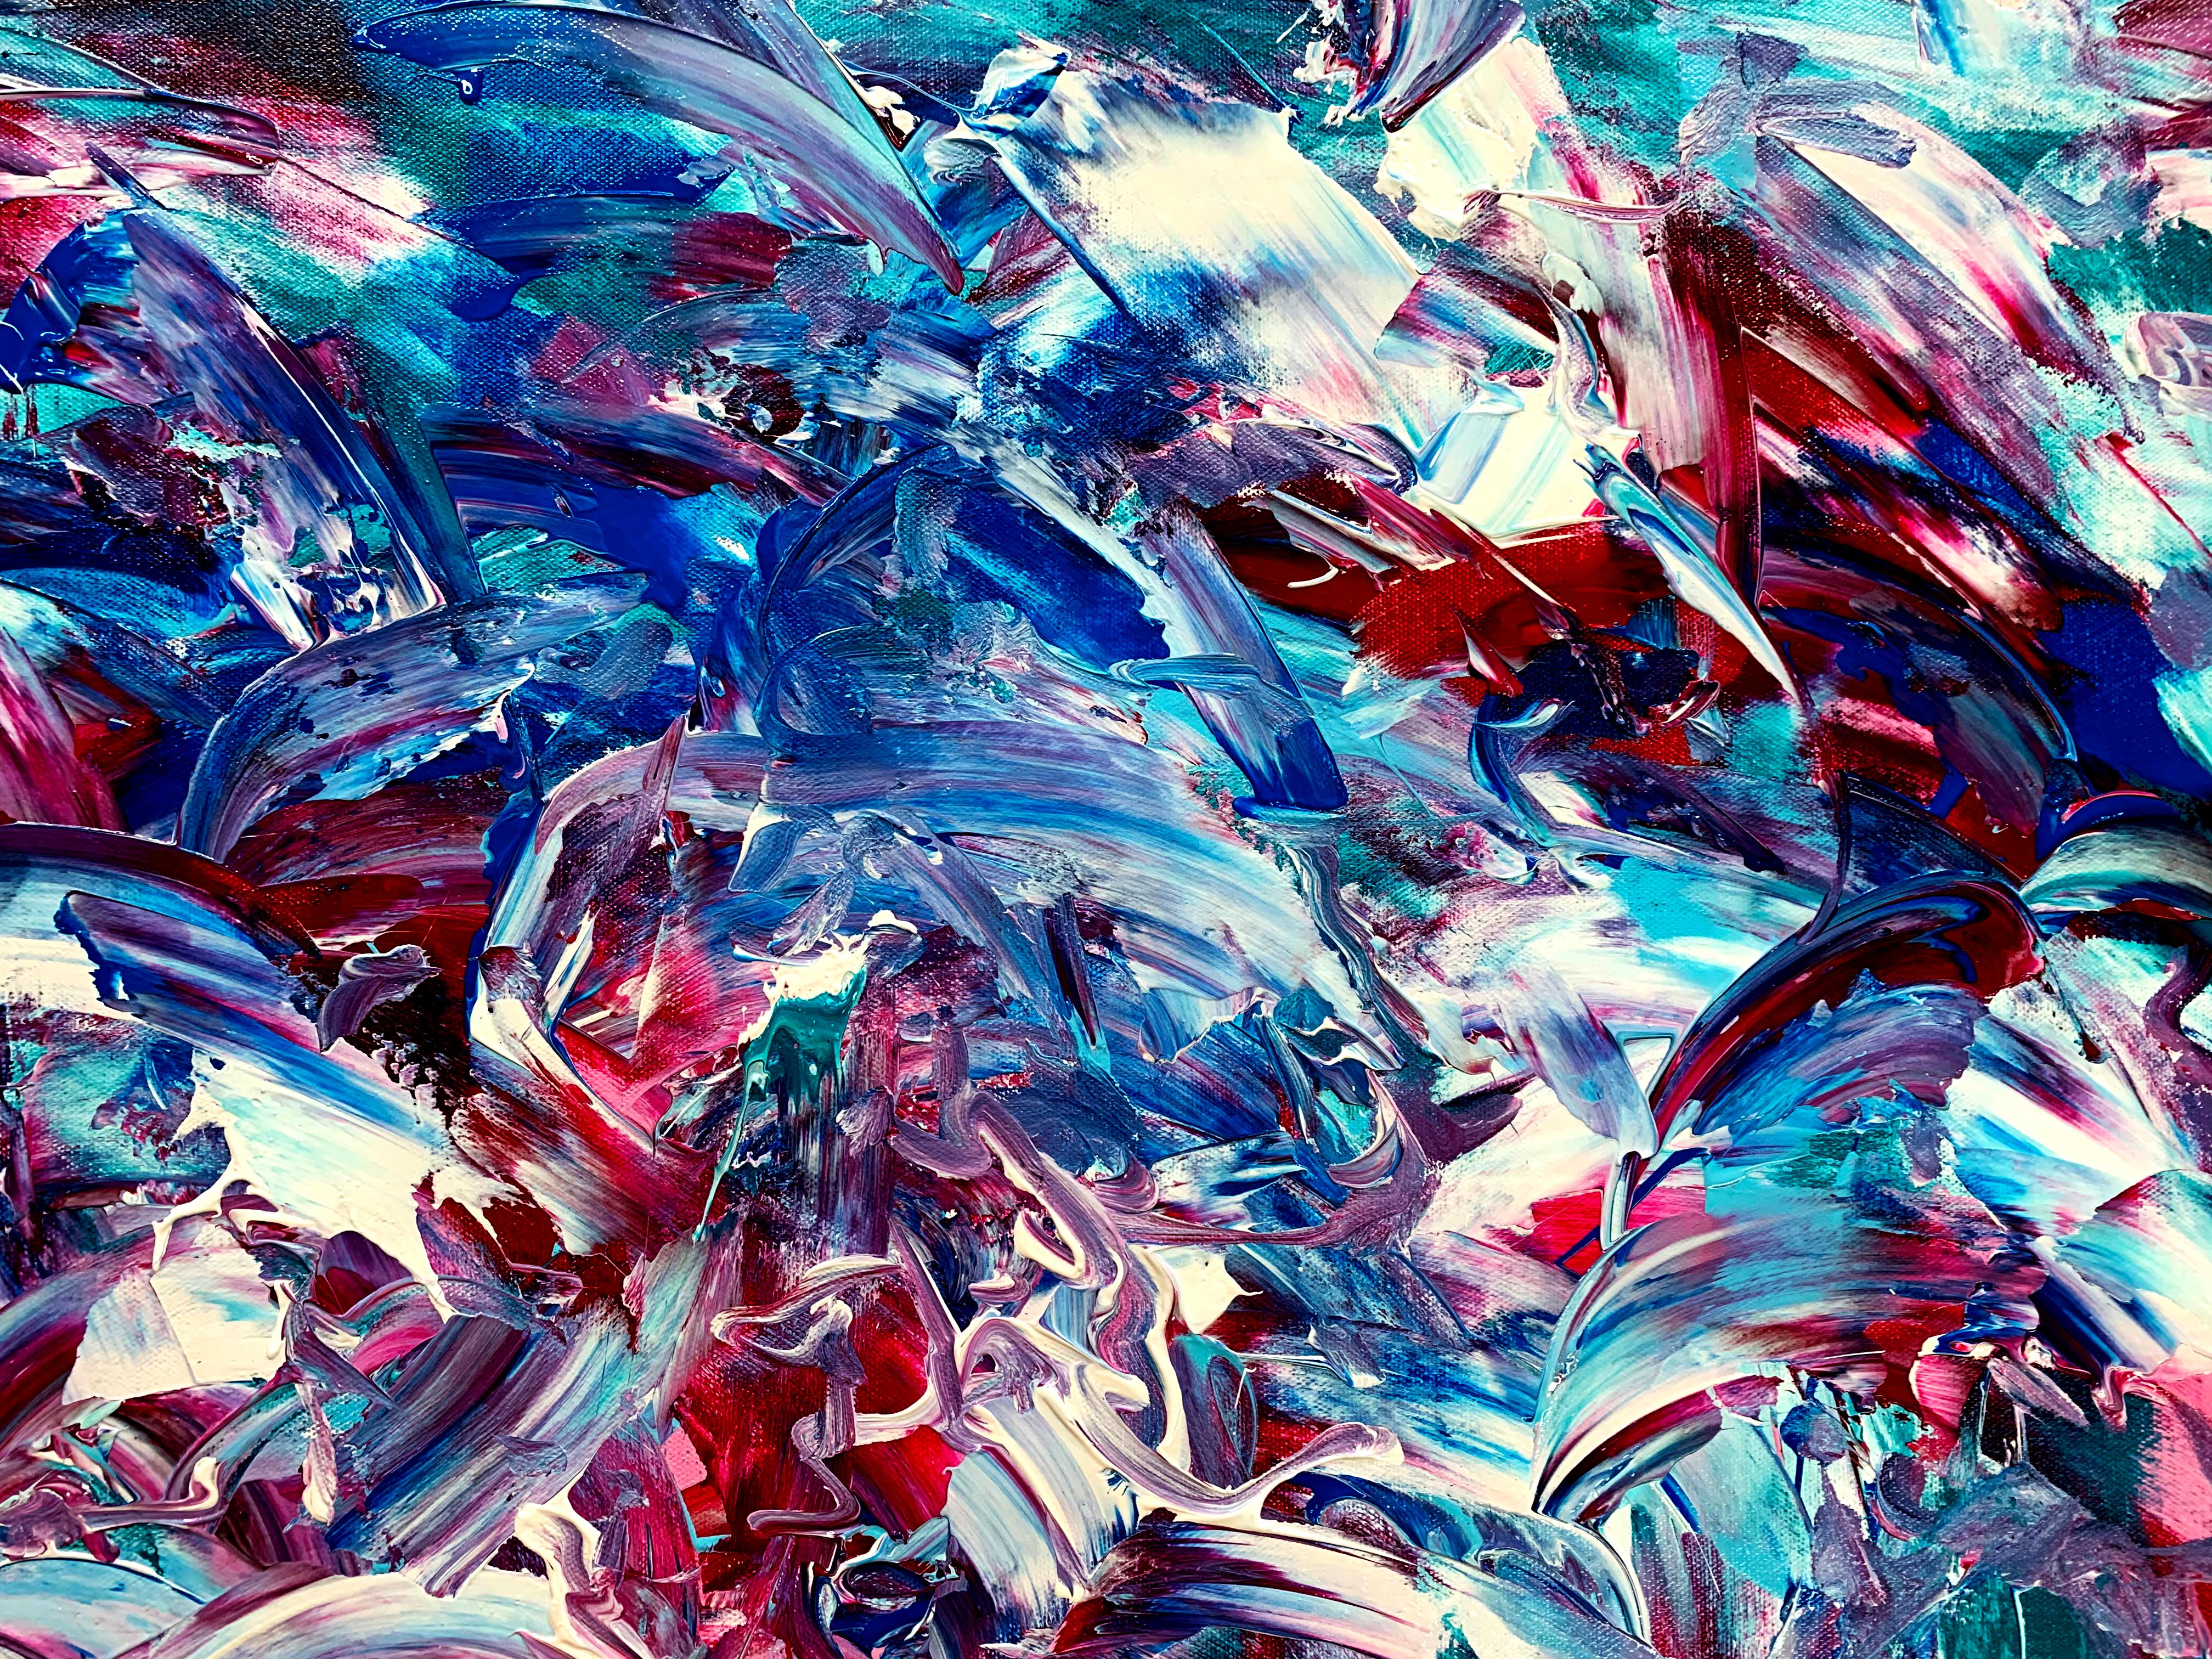 This artwork is about surrendering. Recently, I had to surrender to something that was difficult emotionally, and by surrendering to it the emotional release has really been quite something. This work is painted in the style of abstract